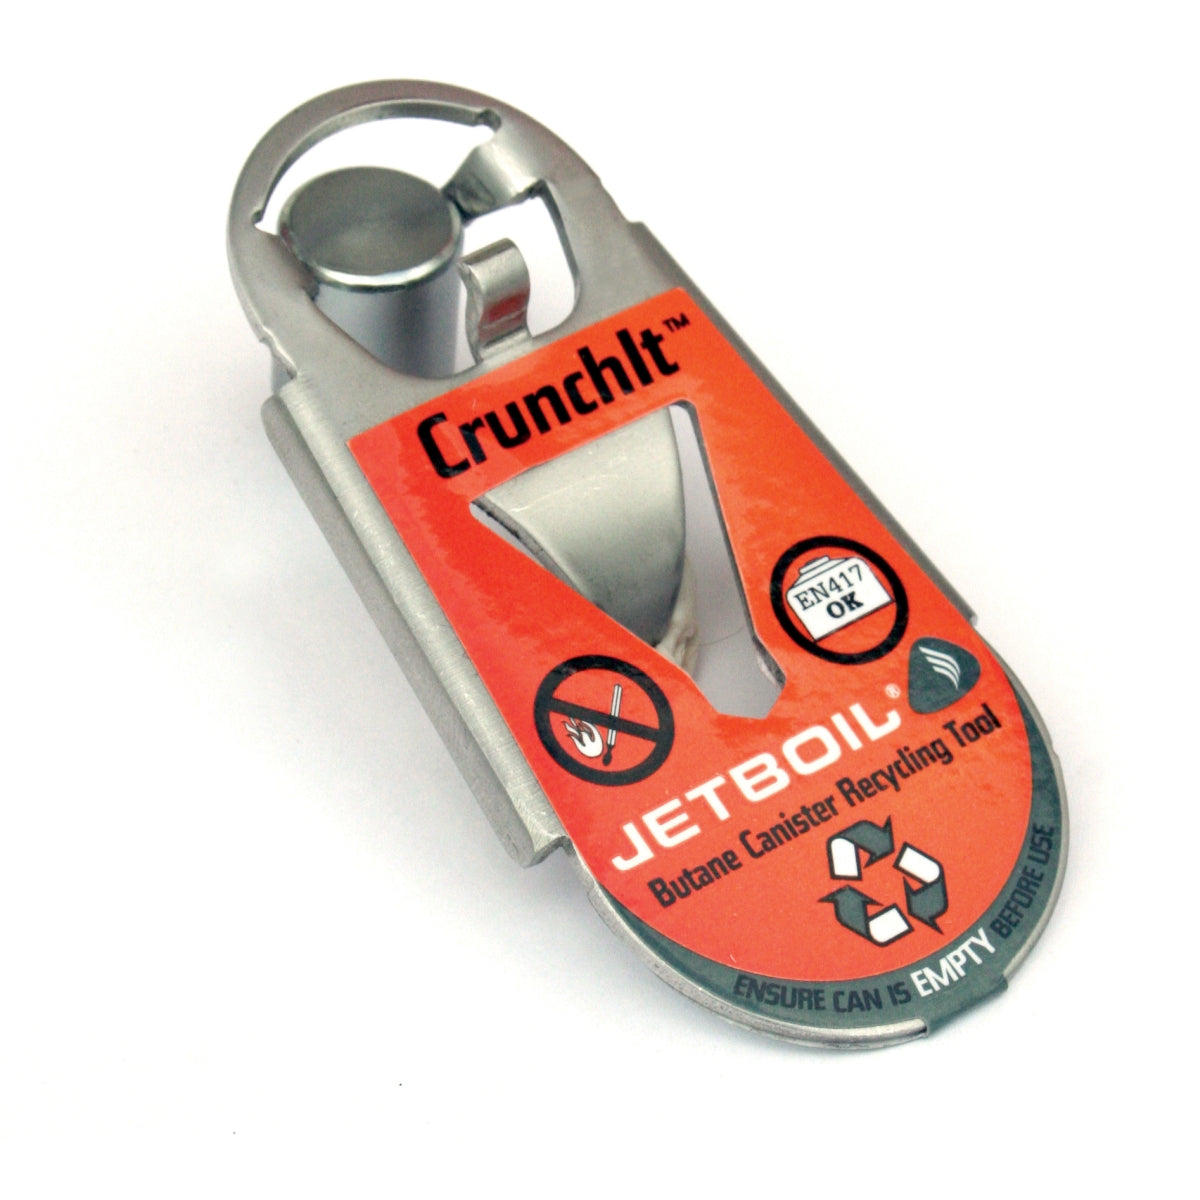 CrunchIt™ Fuel Can Recycling Tool